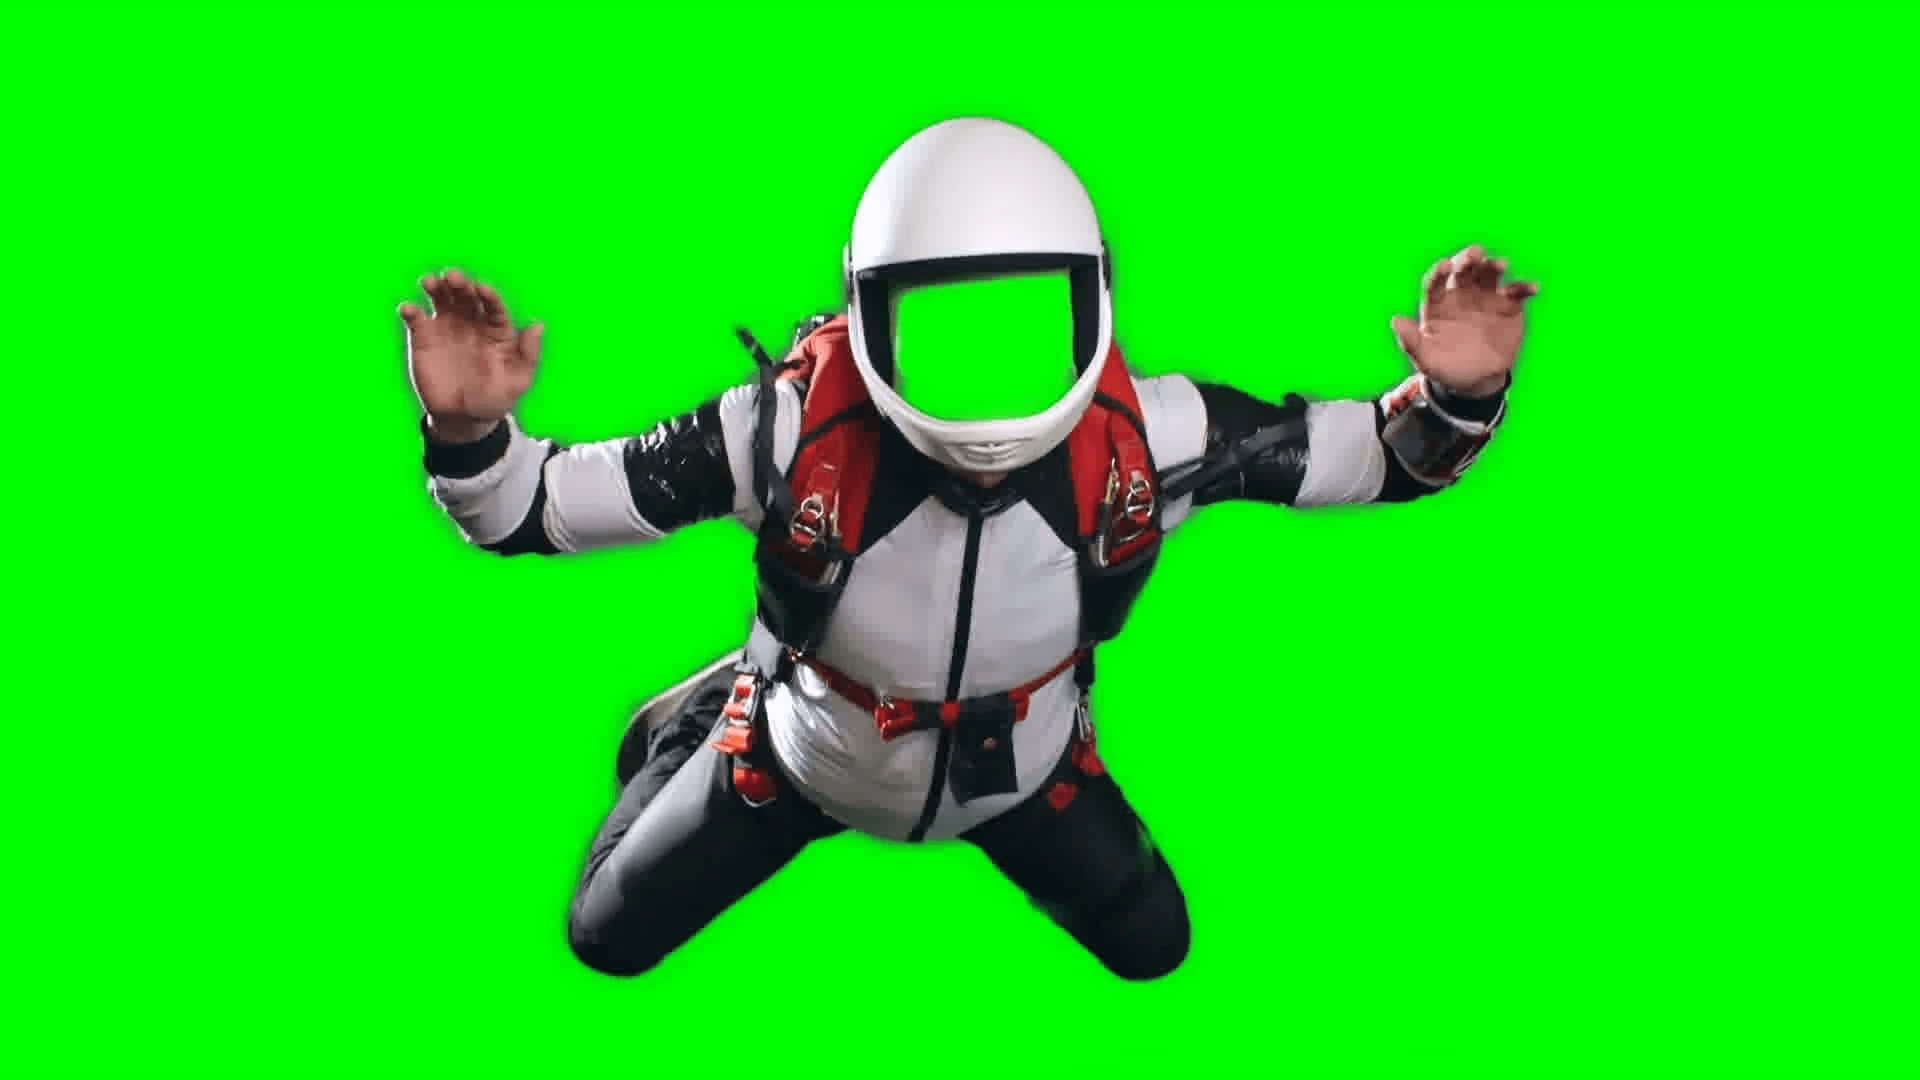 a man in a helmet is jumping on a green screen